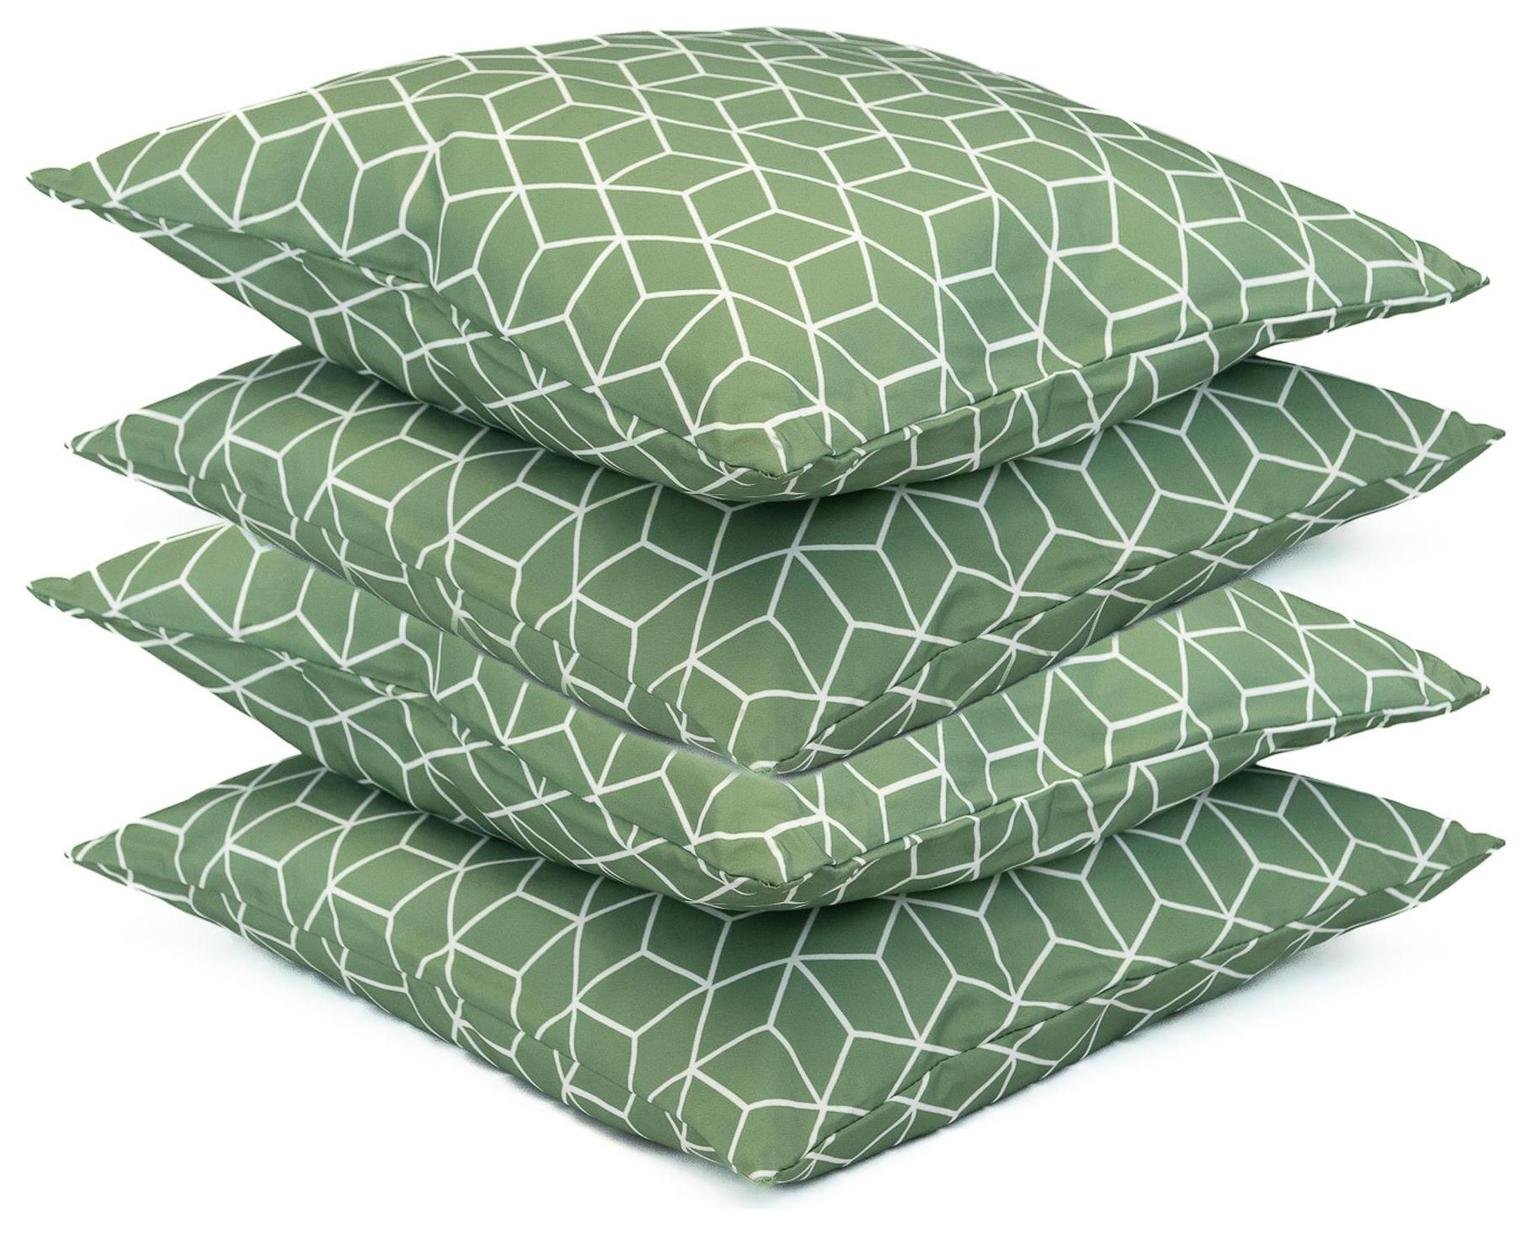 Streetwize Outdoor Cushion Green - Pack of 4 